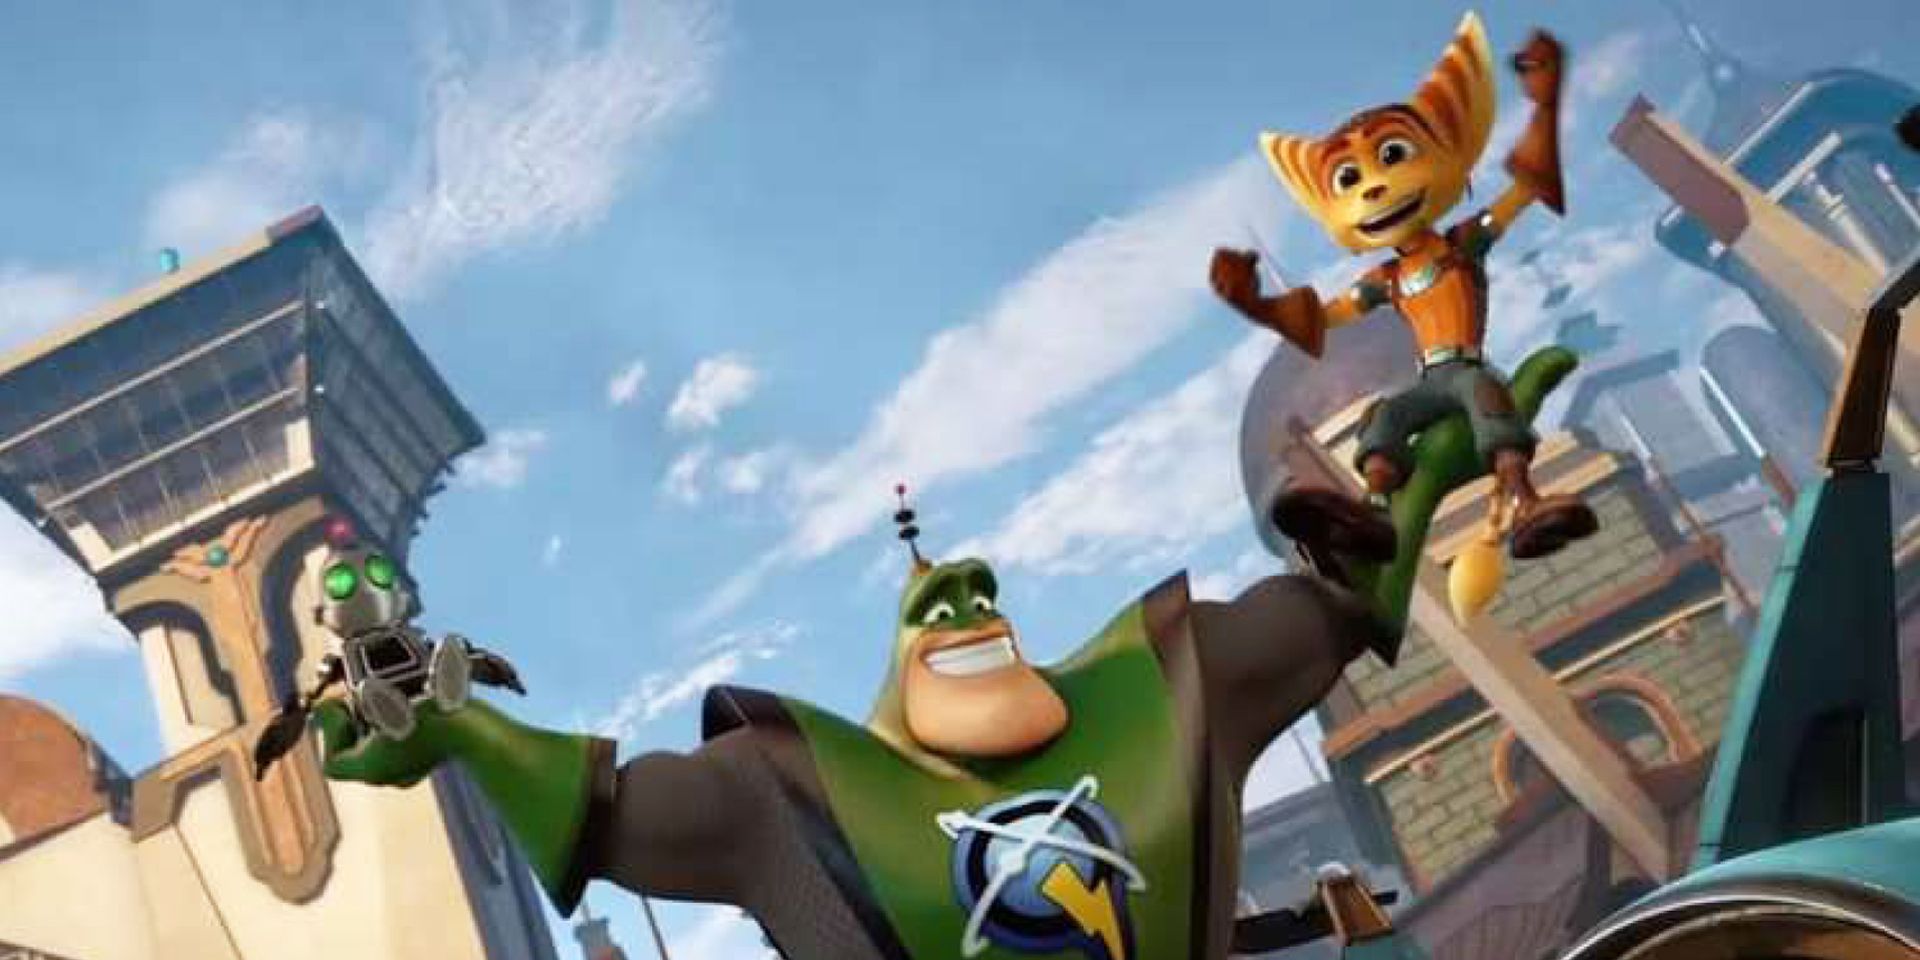 Clank, Captain Qwark, and Ratchet celebrate their victory